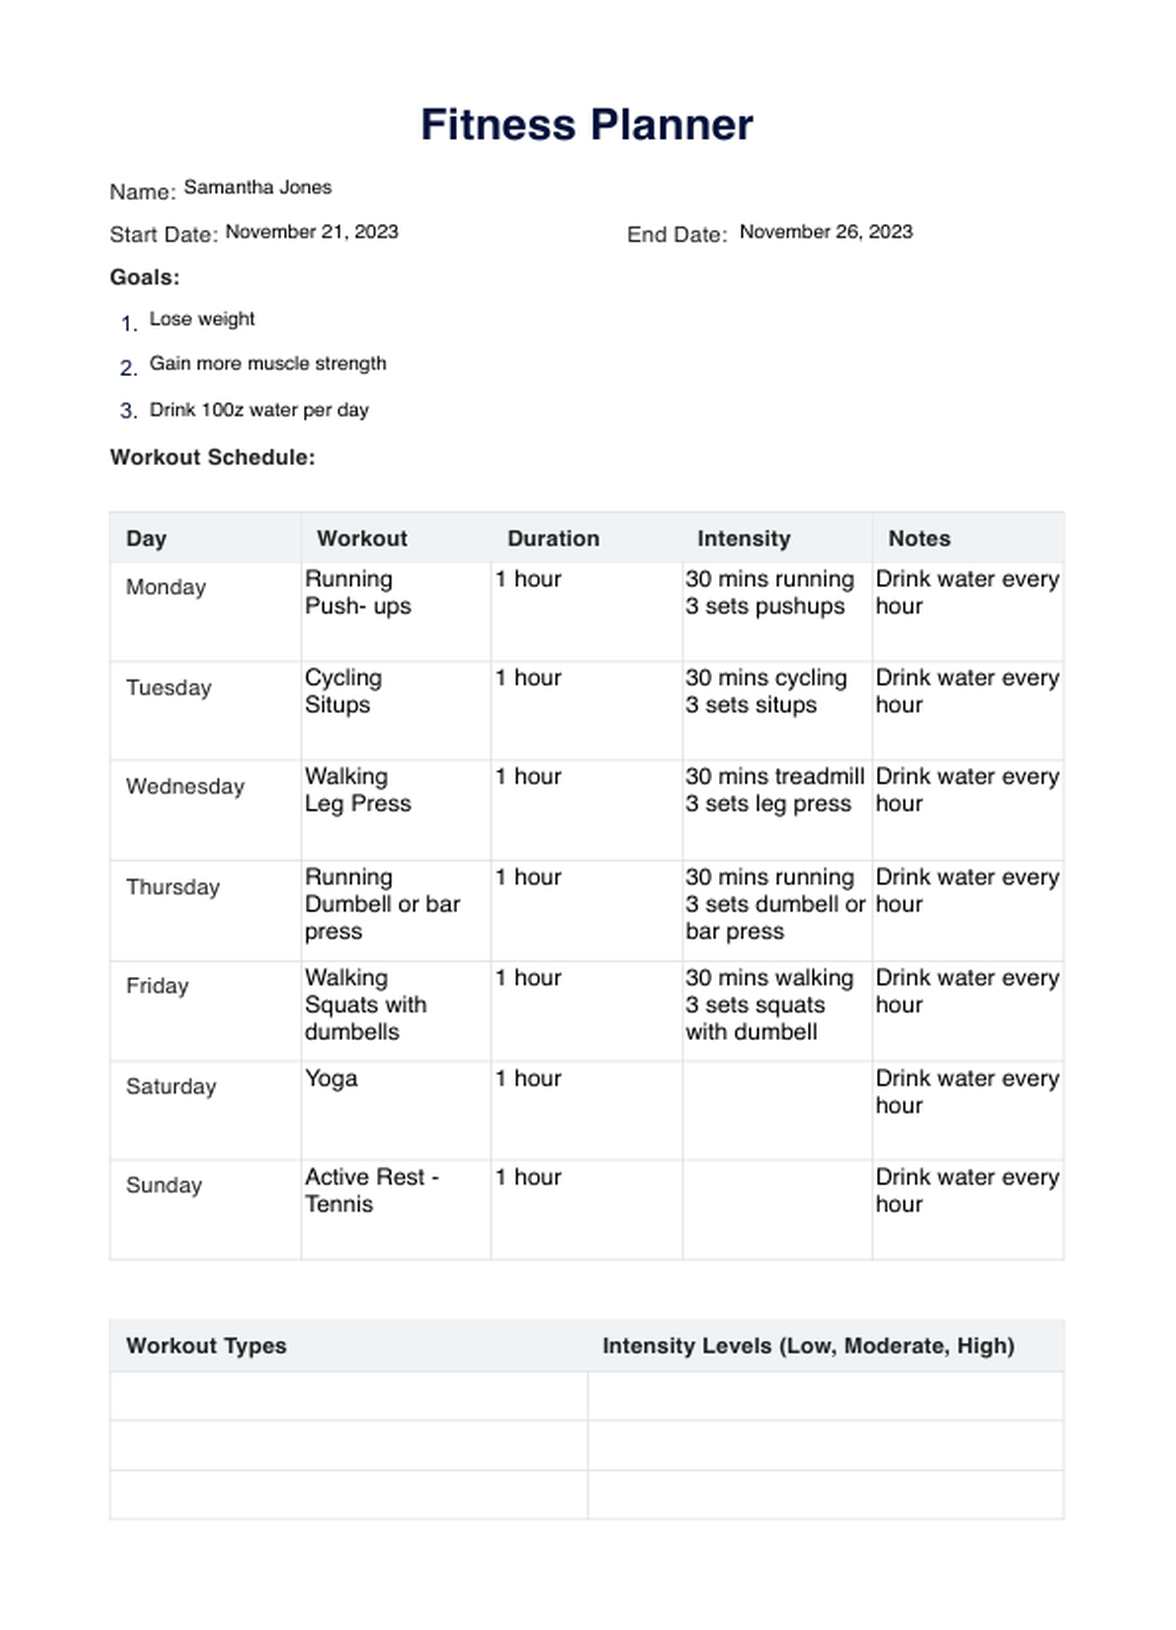 Fitness Planner PDF Example